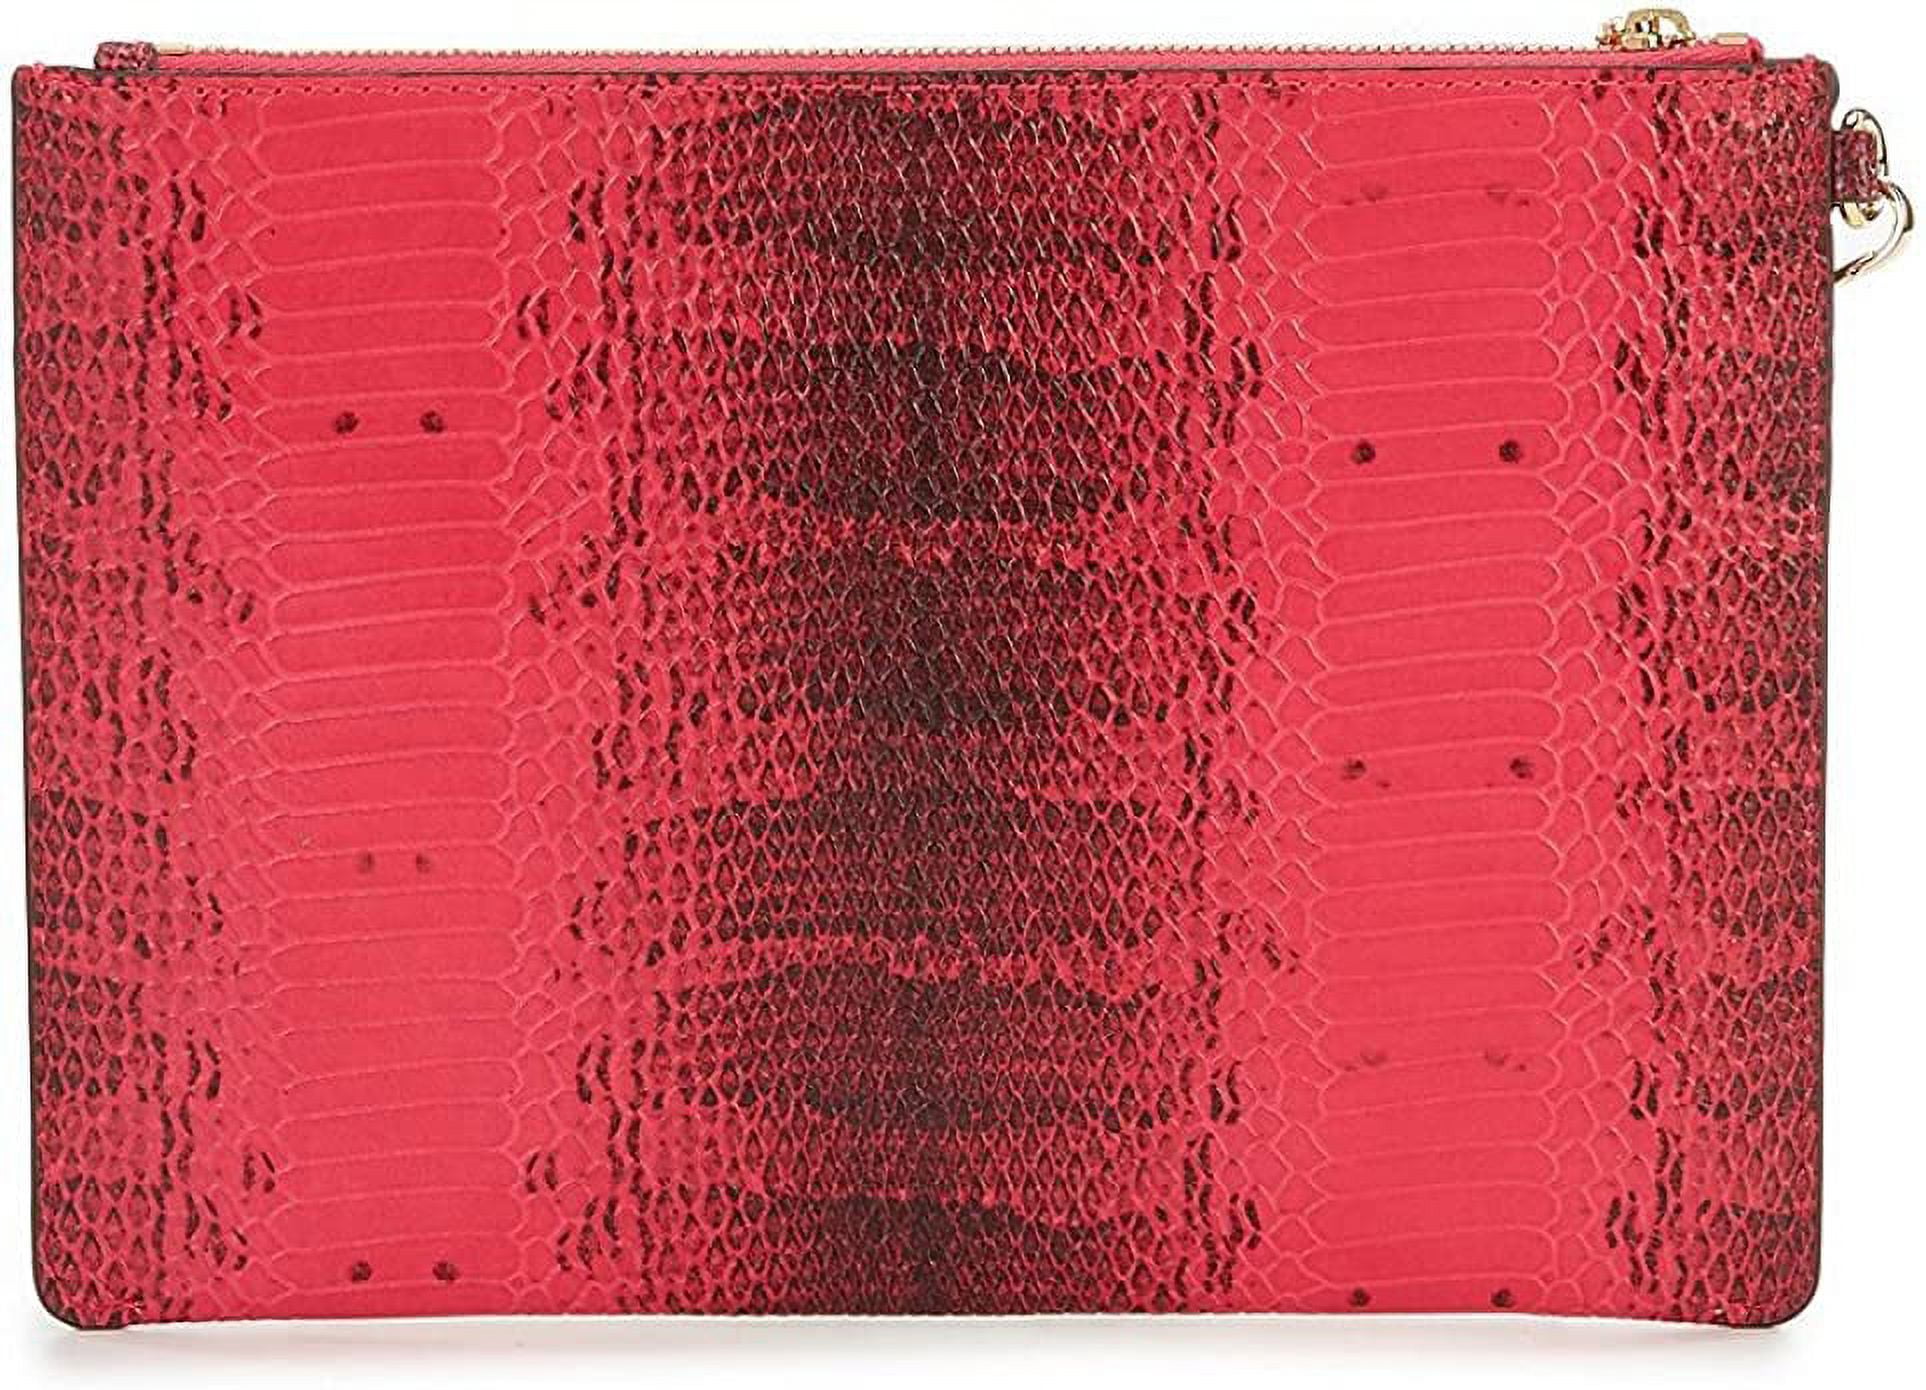 Leather clutch bag Michael Kors Pink in Leather - 28472066